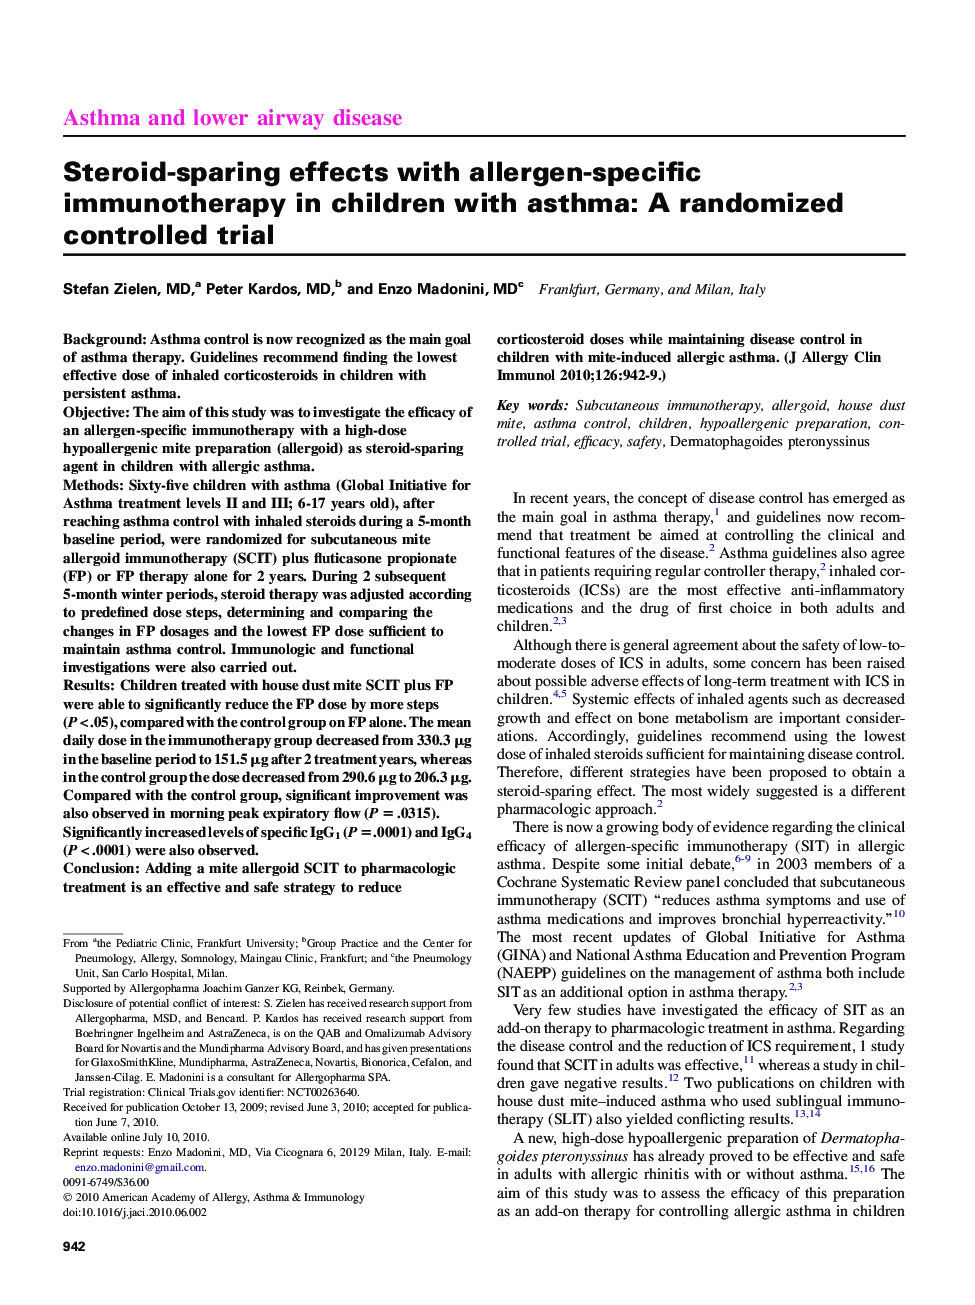 Steroid-sparing effects with allergen-specific immunotherapy in children with asthma: A randomized controlled trial 